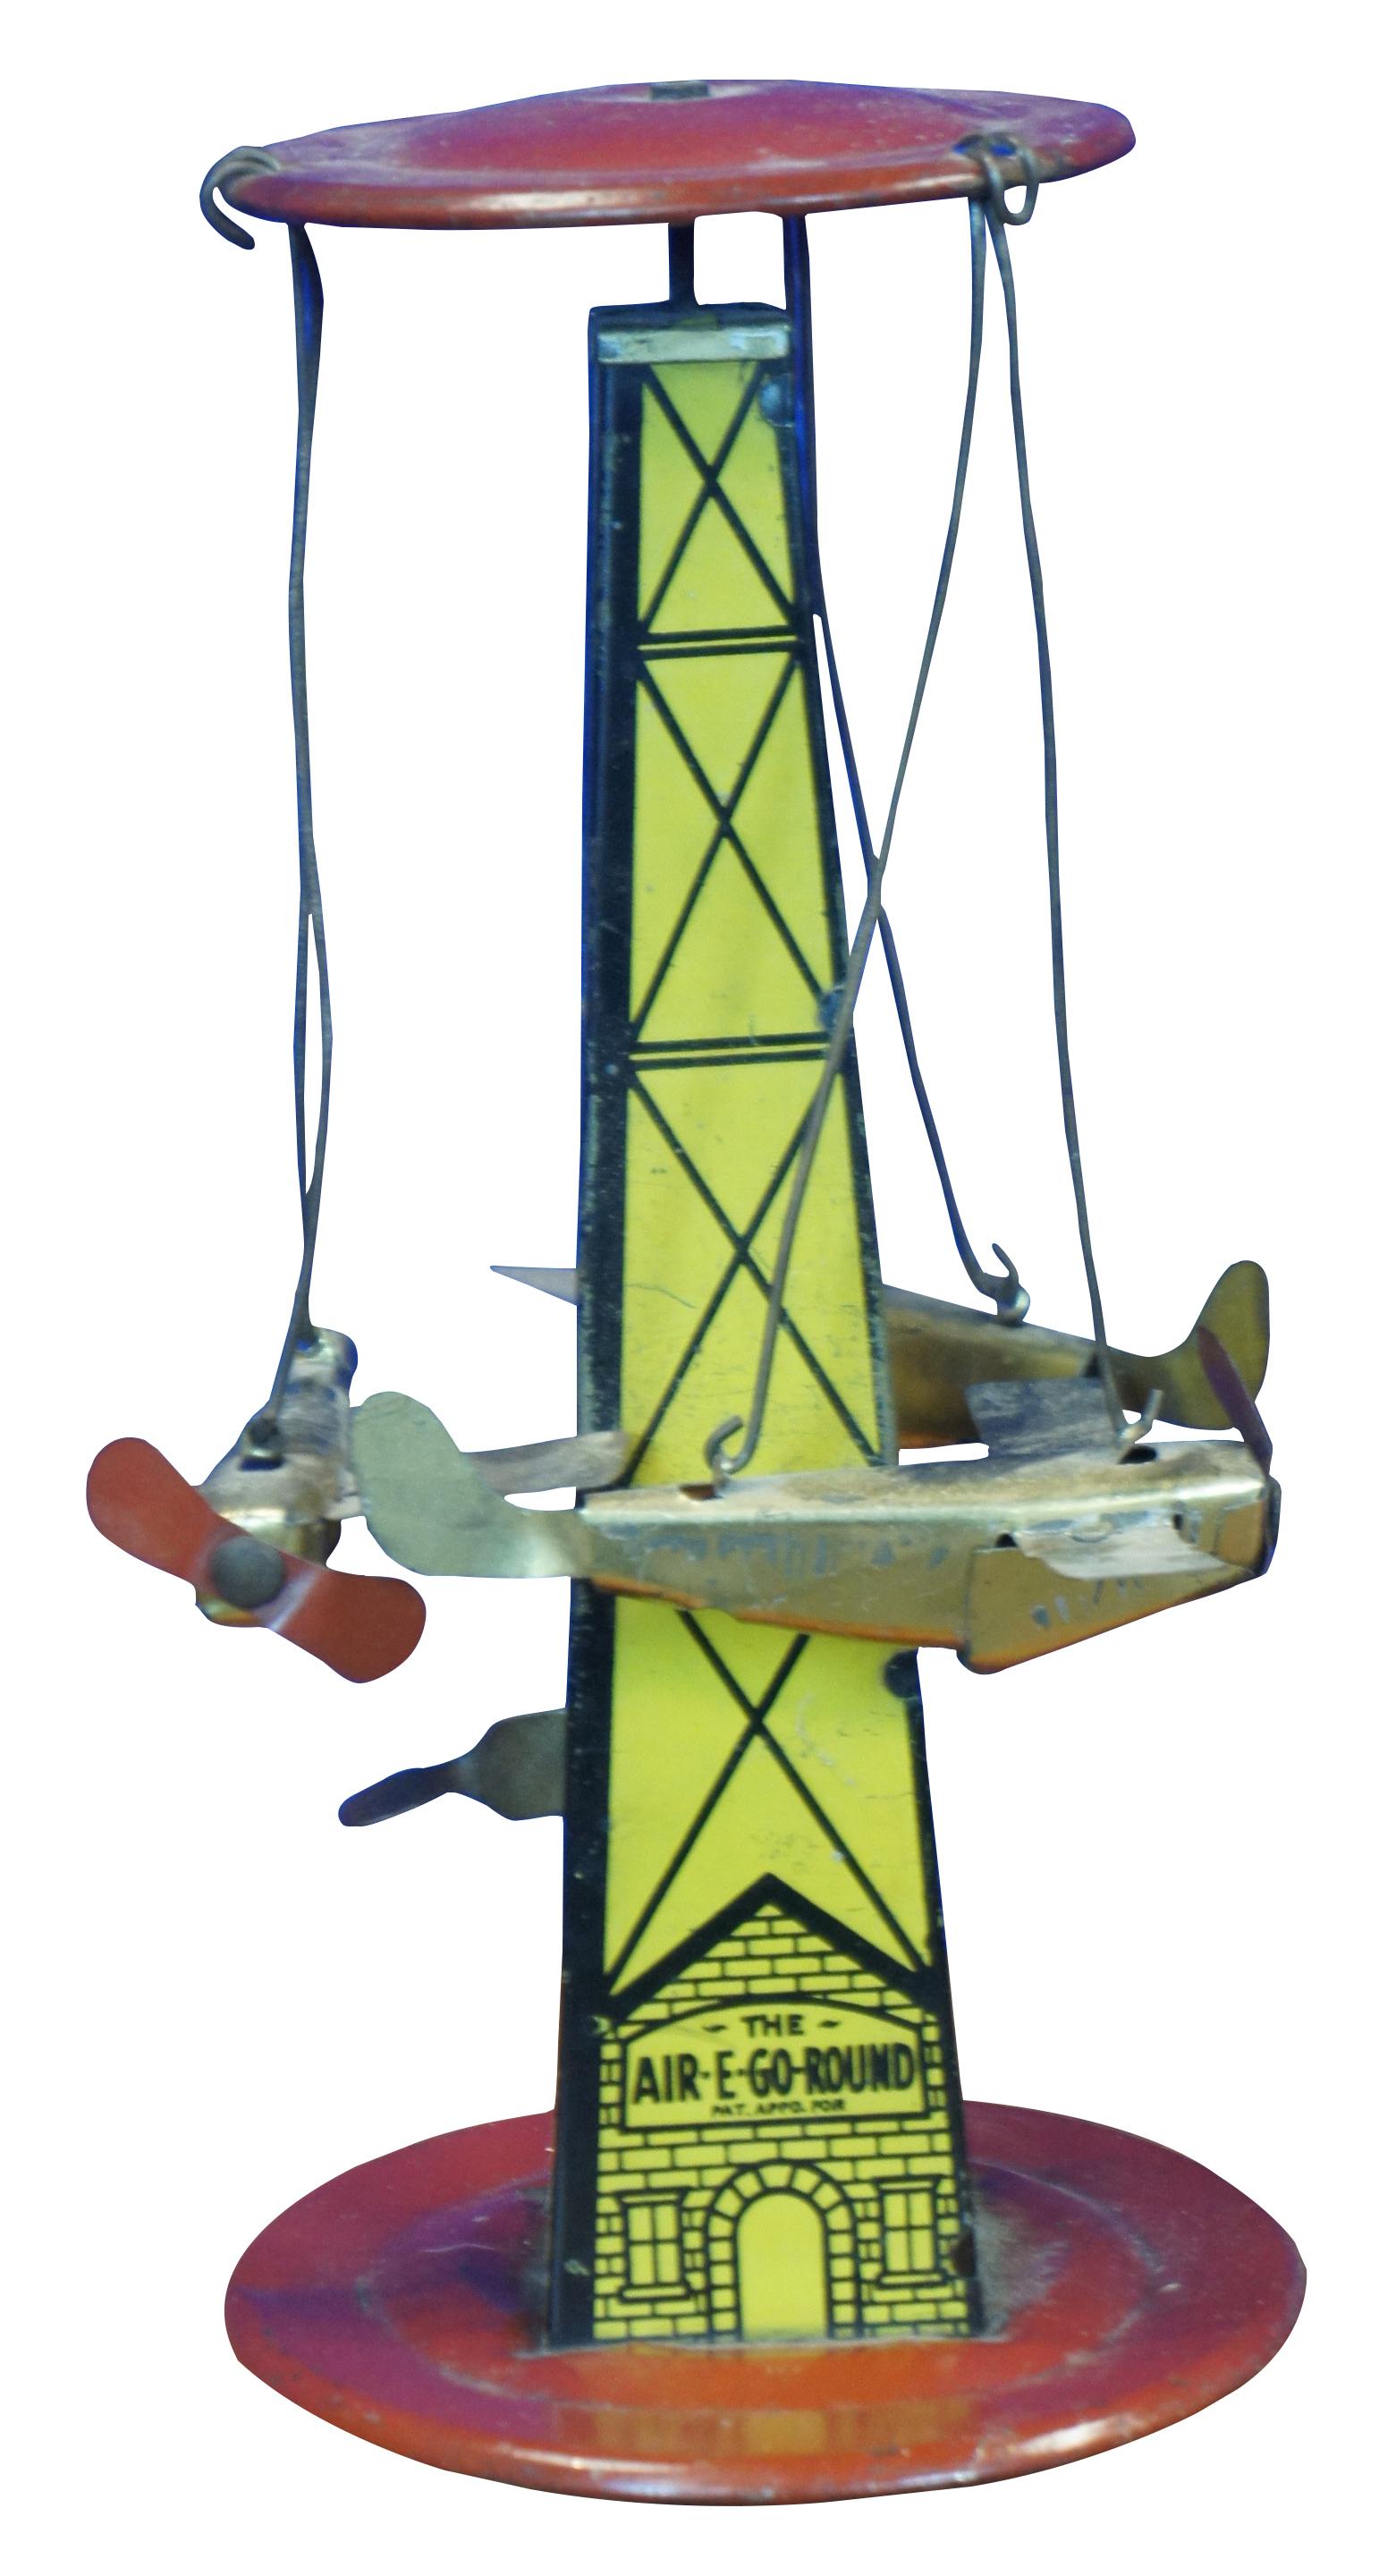 1920’s Air-E-Go-Round tin litho mery-go-round style toy by Reeves Manufacturing Company, featuring a yeloow tower with red cap and base, with three airplanes the circle around it when the lever at the base is pressed.

Reeves Manufacturing Co.